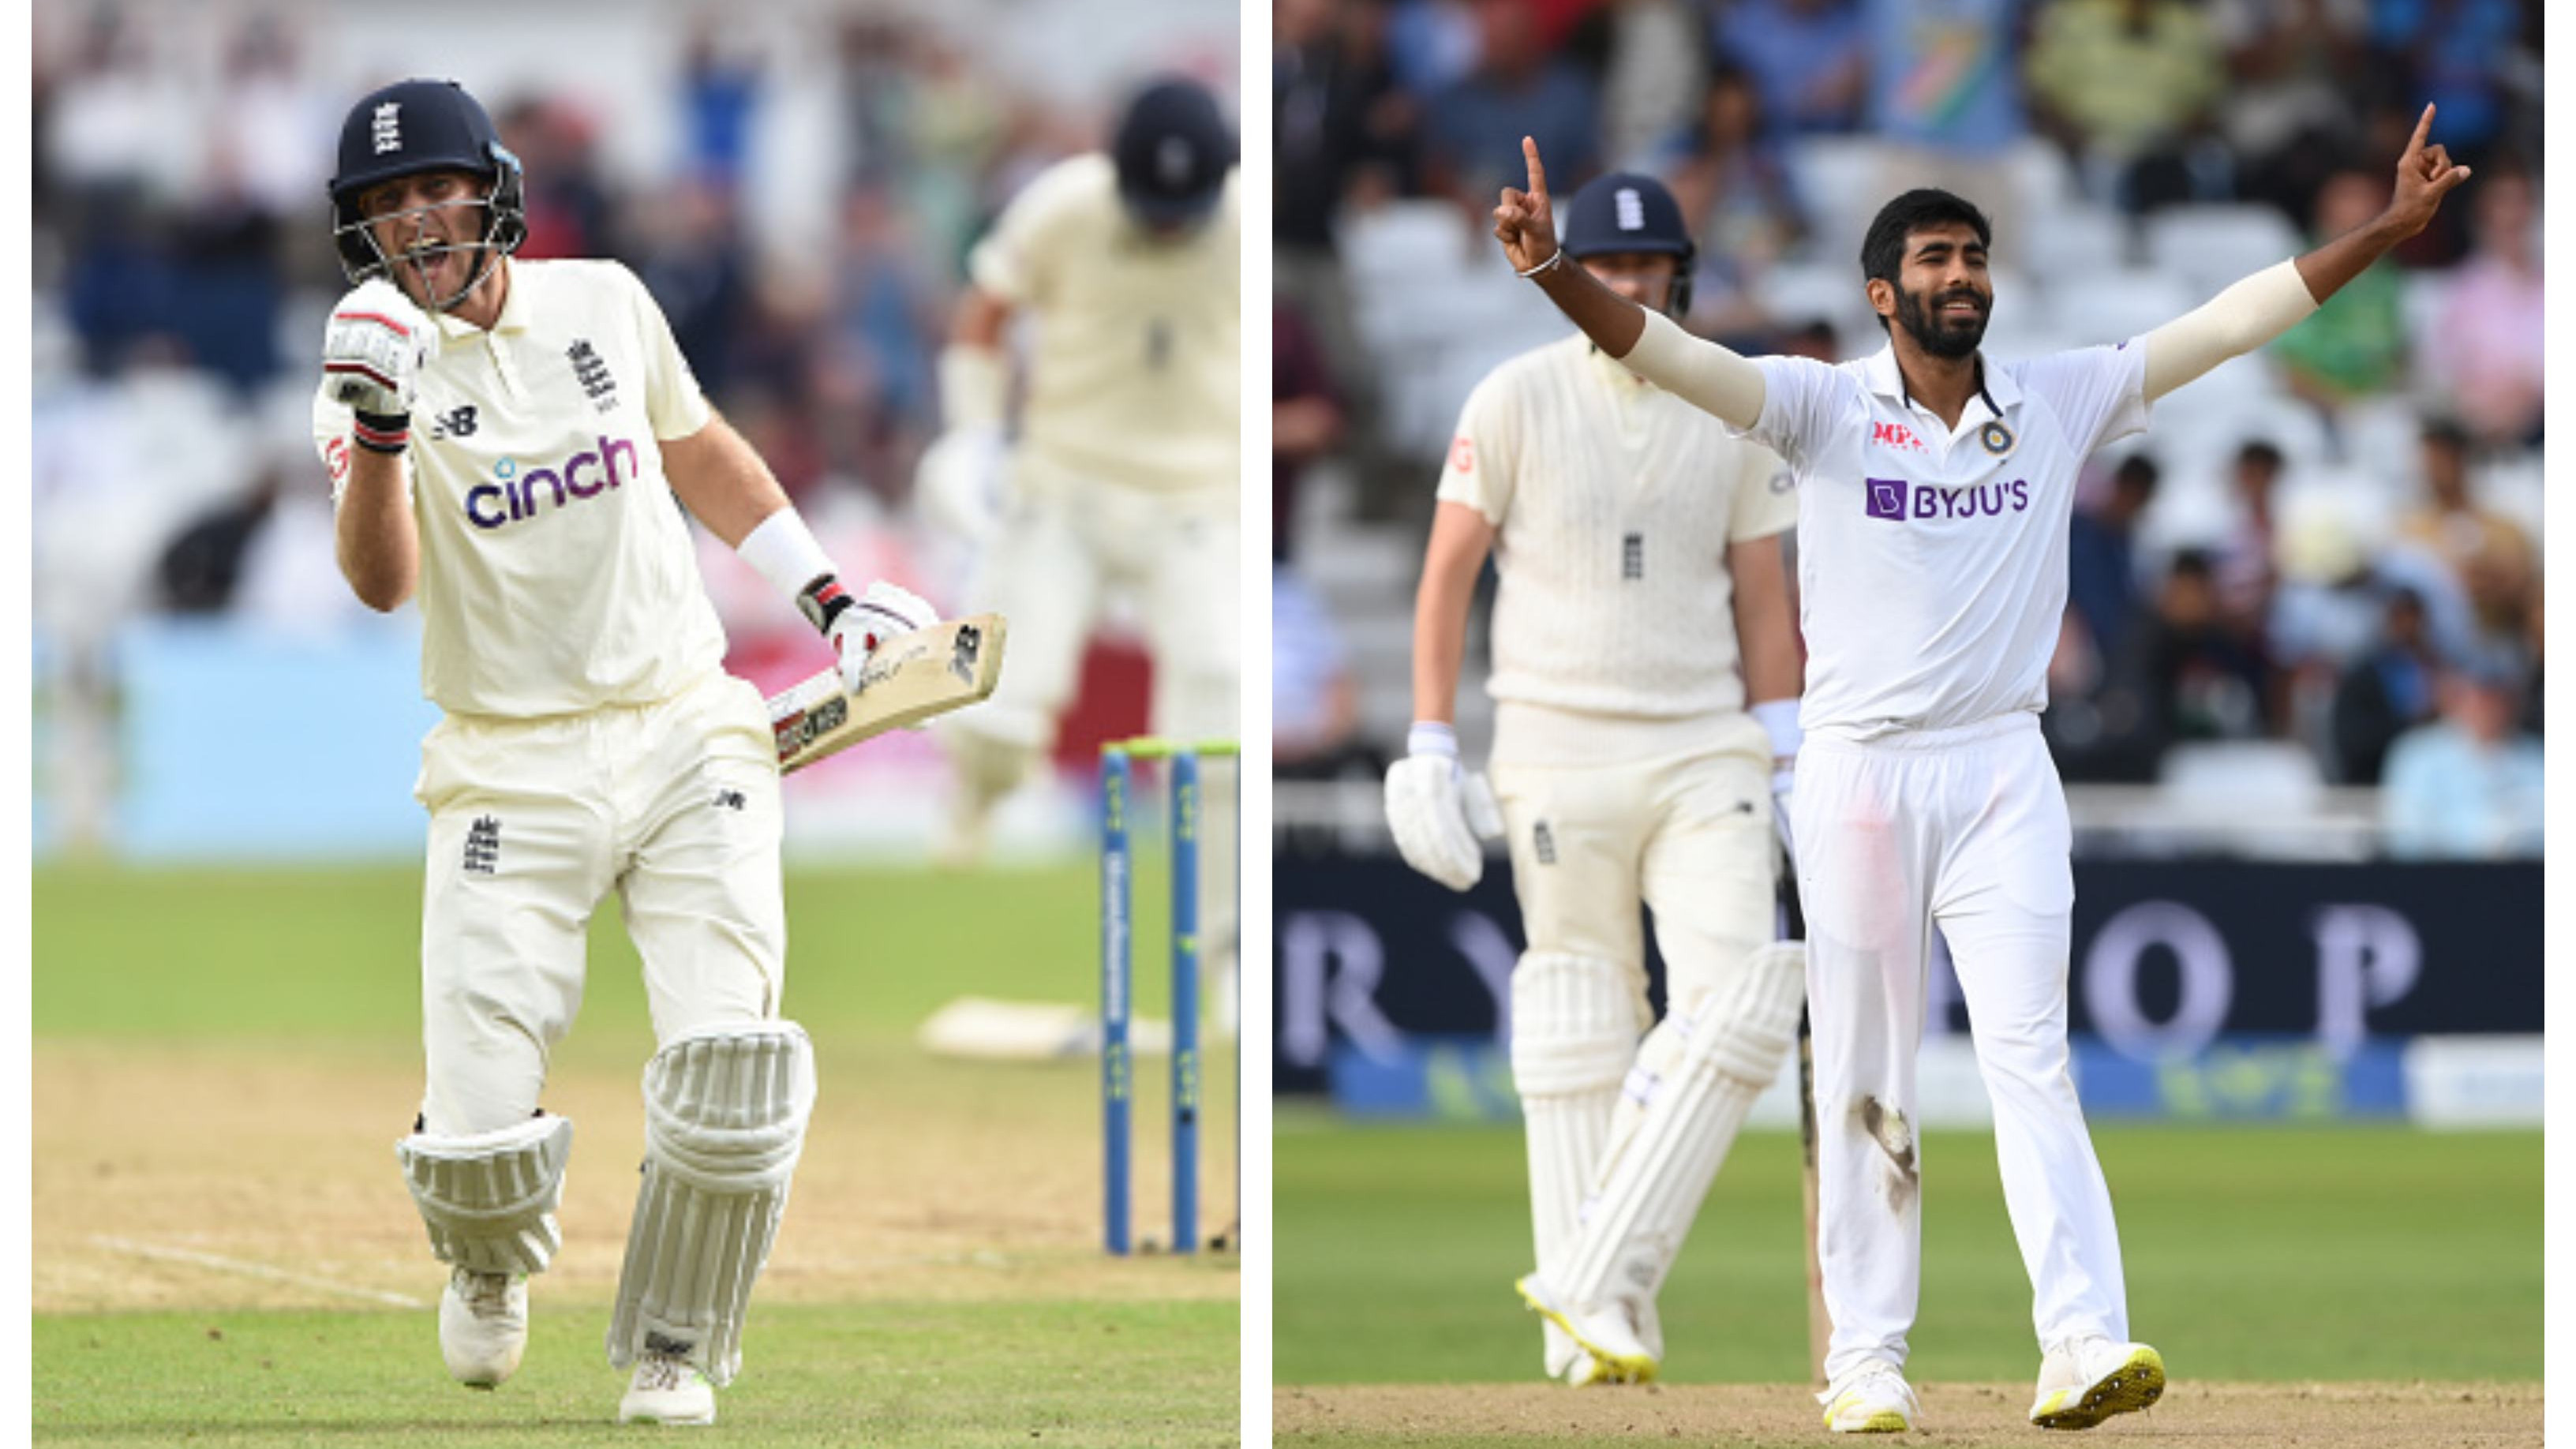 ENG v IND 2021: Cricket fraternity hails Root, Bumrah’s exceptional outings with bat and ball on Day 4 at Trent Bridge